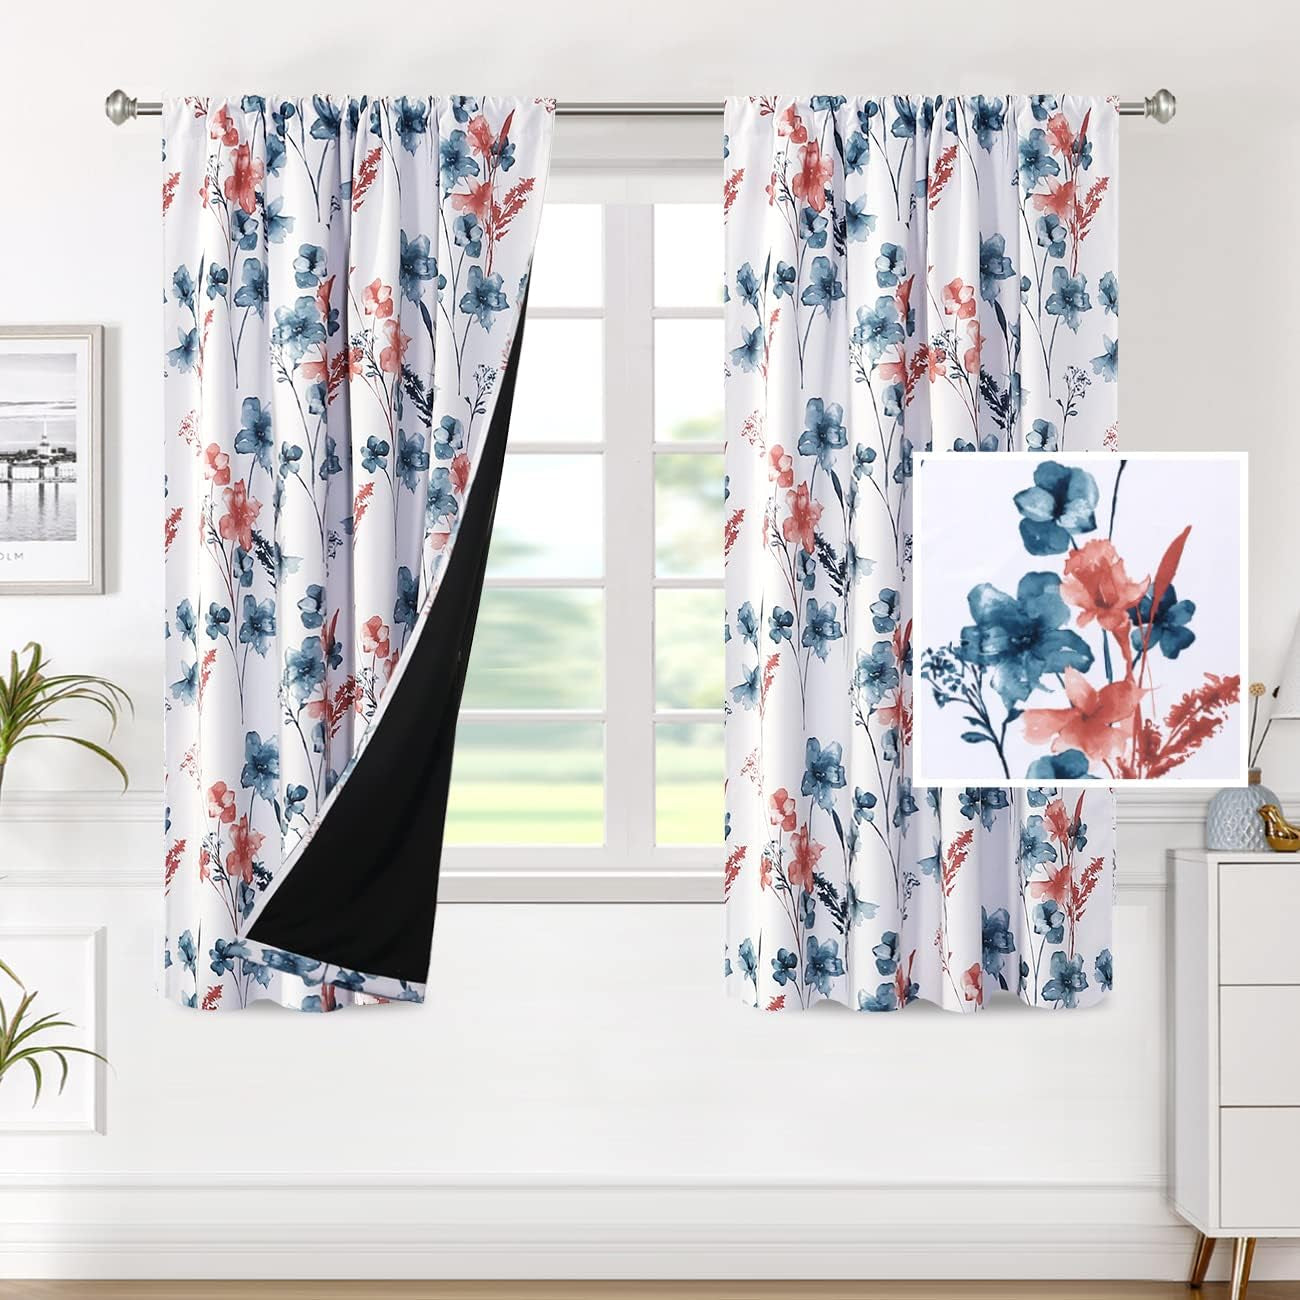 H.VERSAILTEX 100% Blackout Curtains for Bedroom Cattleya Floral Printed Drapes 84 Inches Long Leah Floral Pattern Full Light Blocking Drapes with Black Liner Rod Pocket 2 Panels, Navy/Taupe  H.VERSAILTEX Stone Blue/Coral 52"W X 63"L 